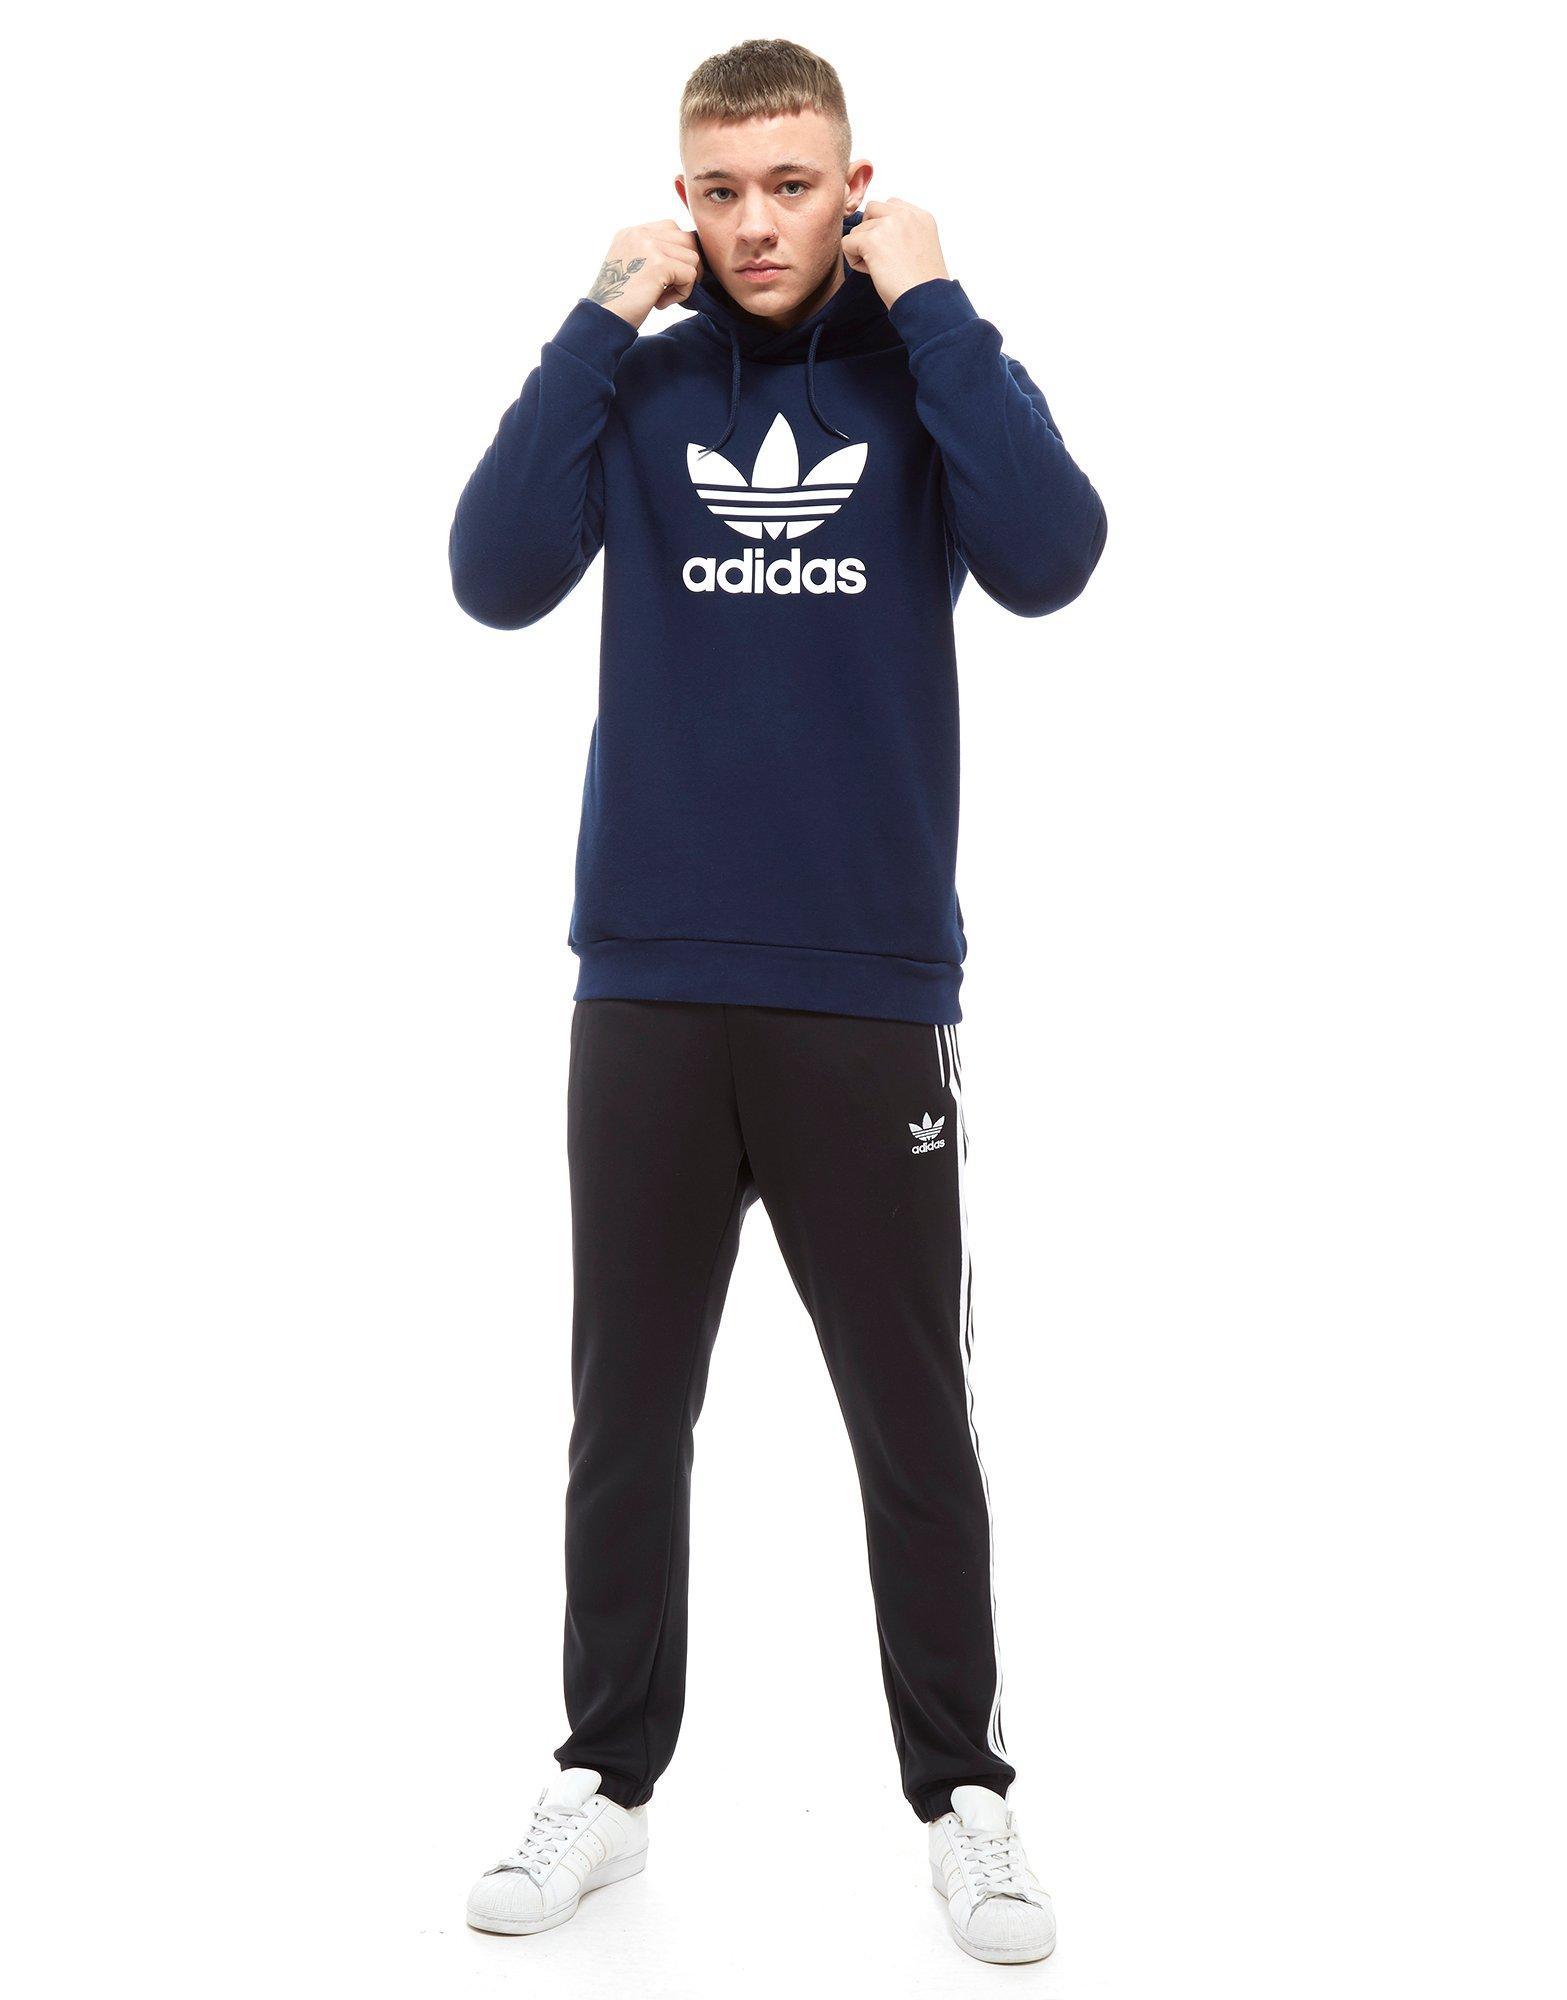 adidas Originals Cotton Trefoil State Overhead Hoody in Blue/White (Blue)  for Men - Lyst